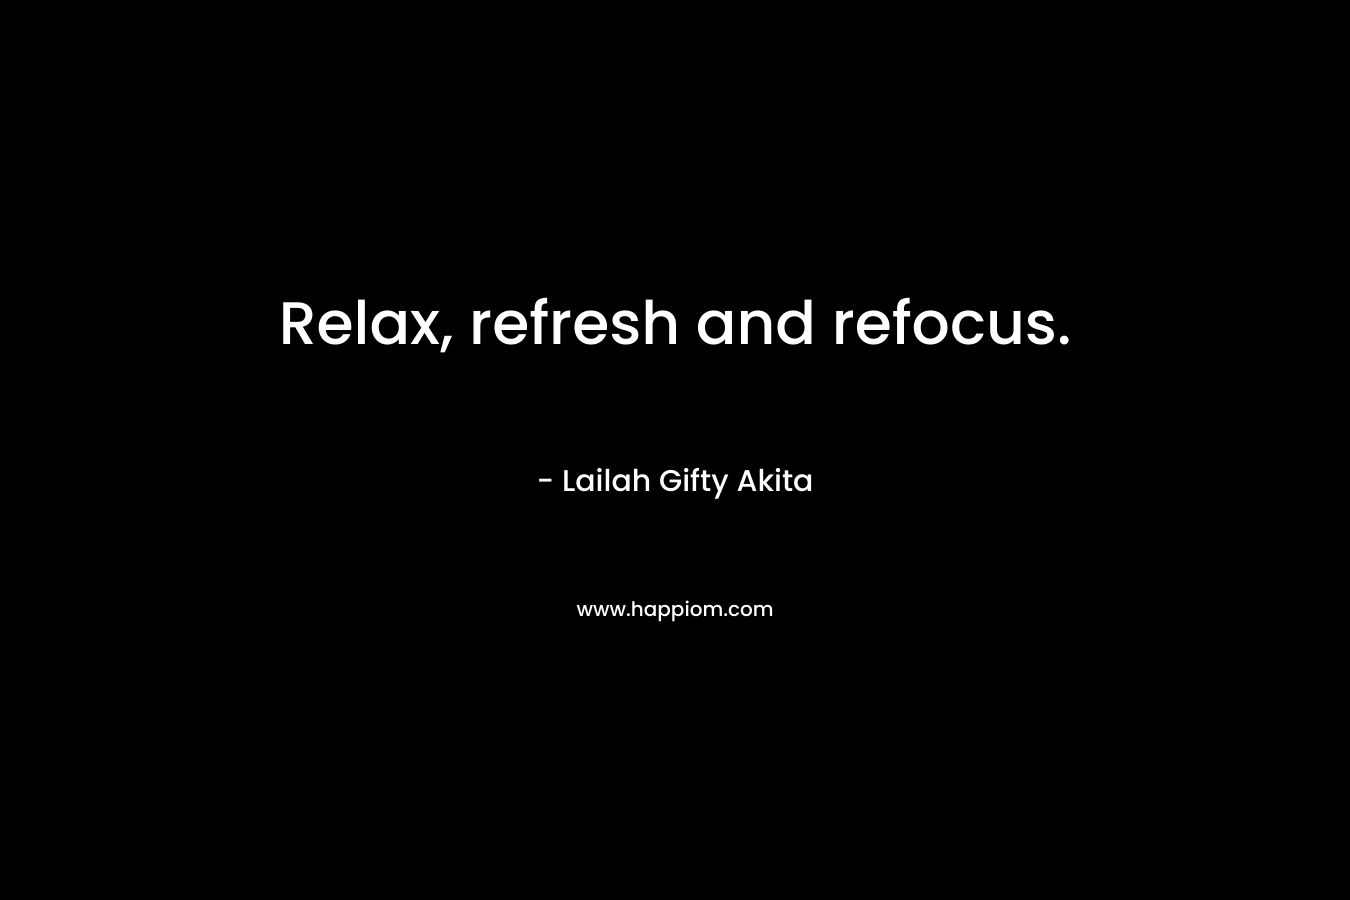 Relax, refresh and refocus. – Lailah Gifty Akita